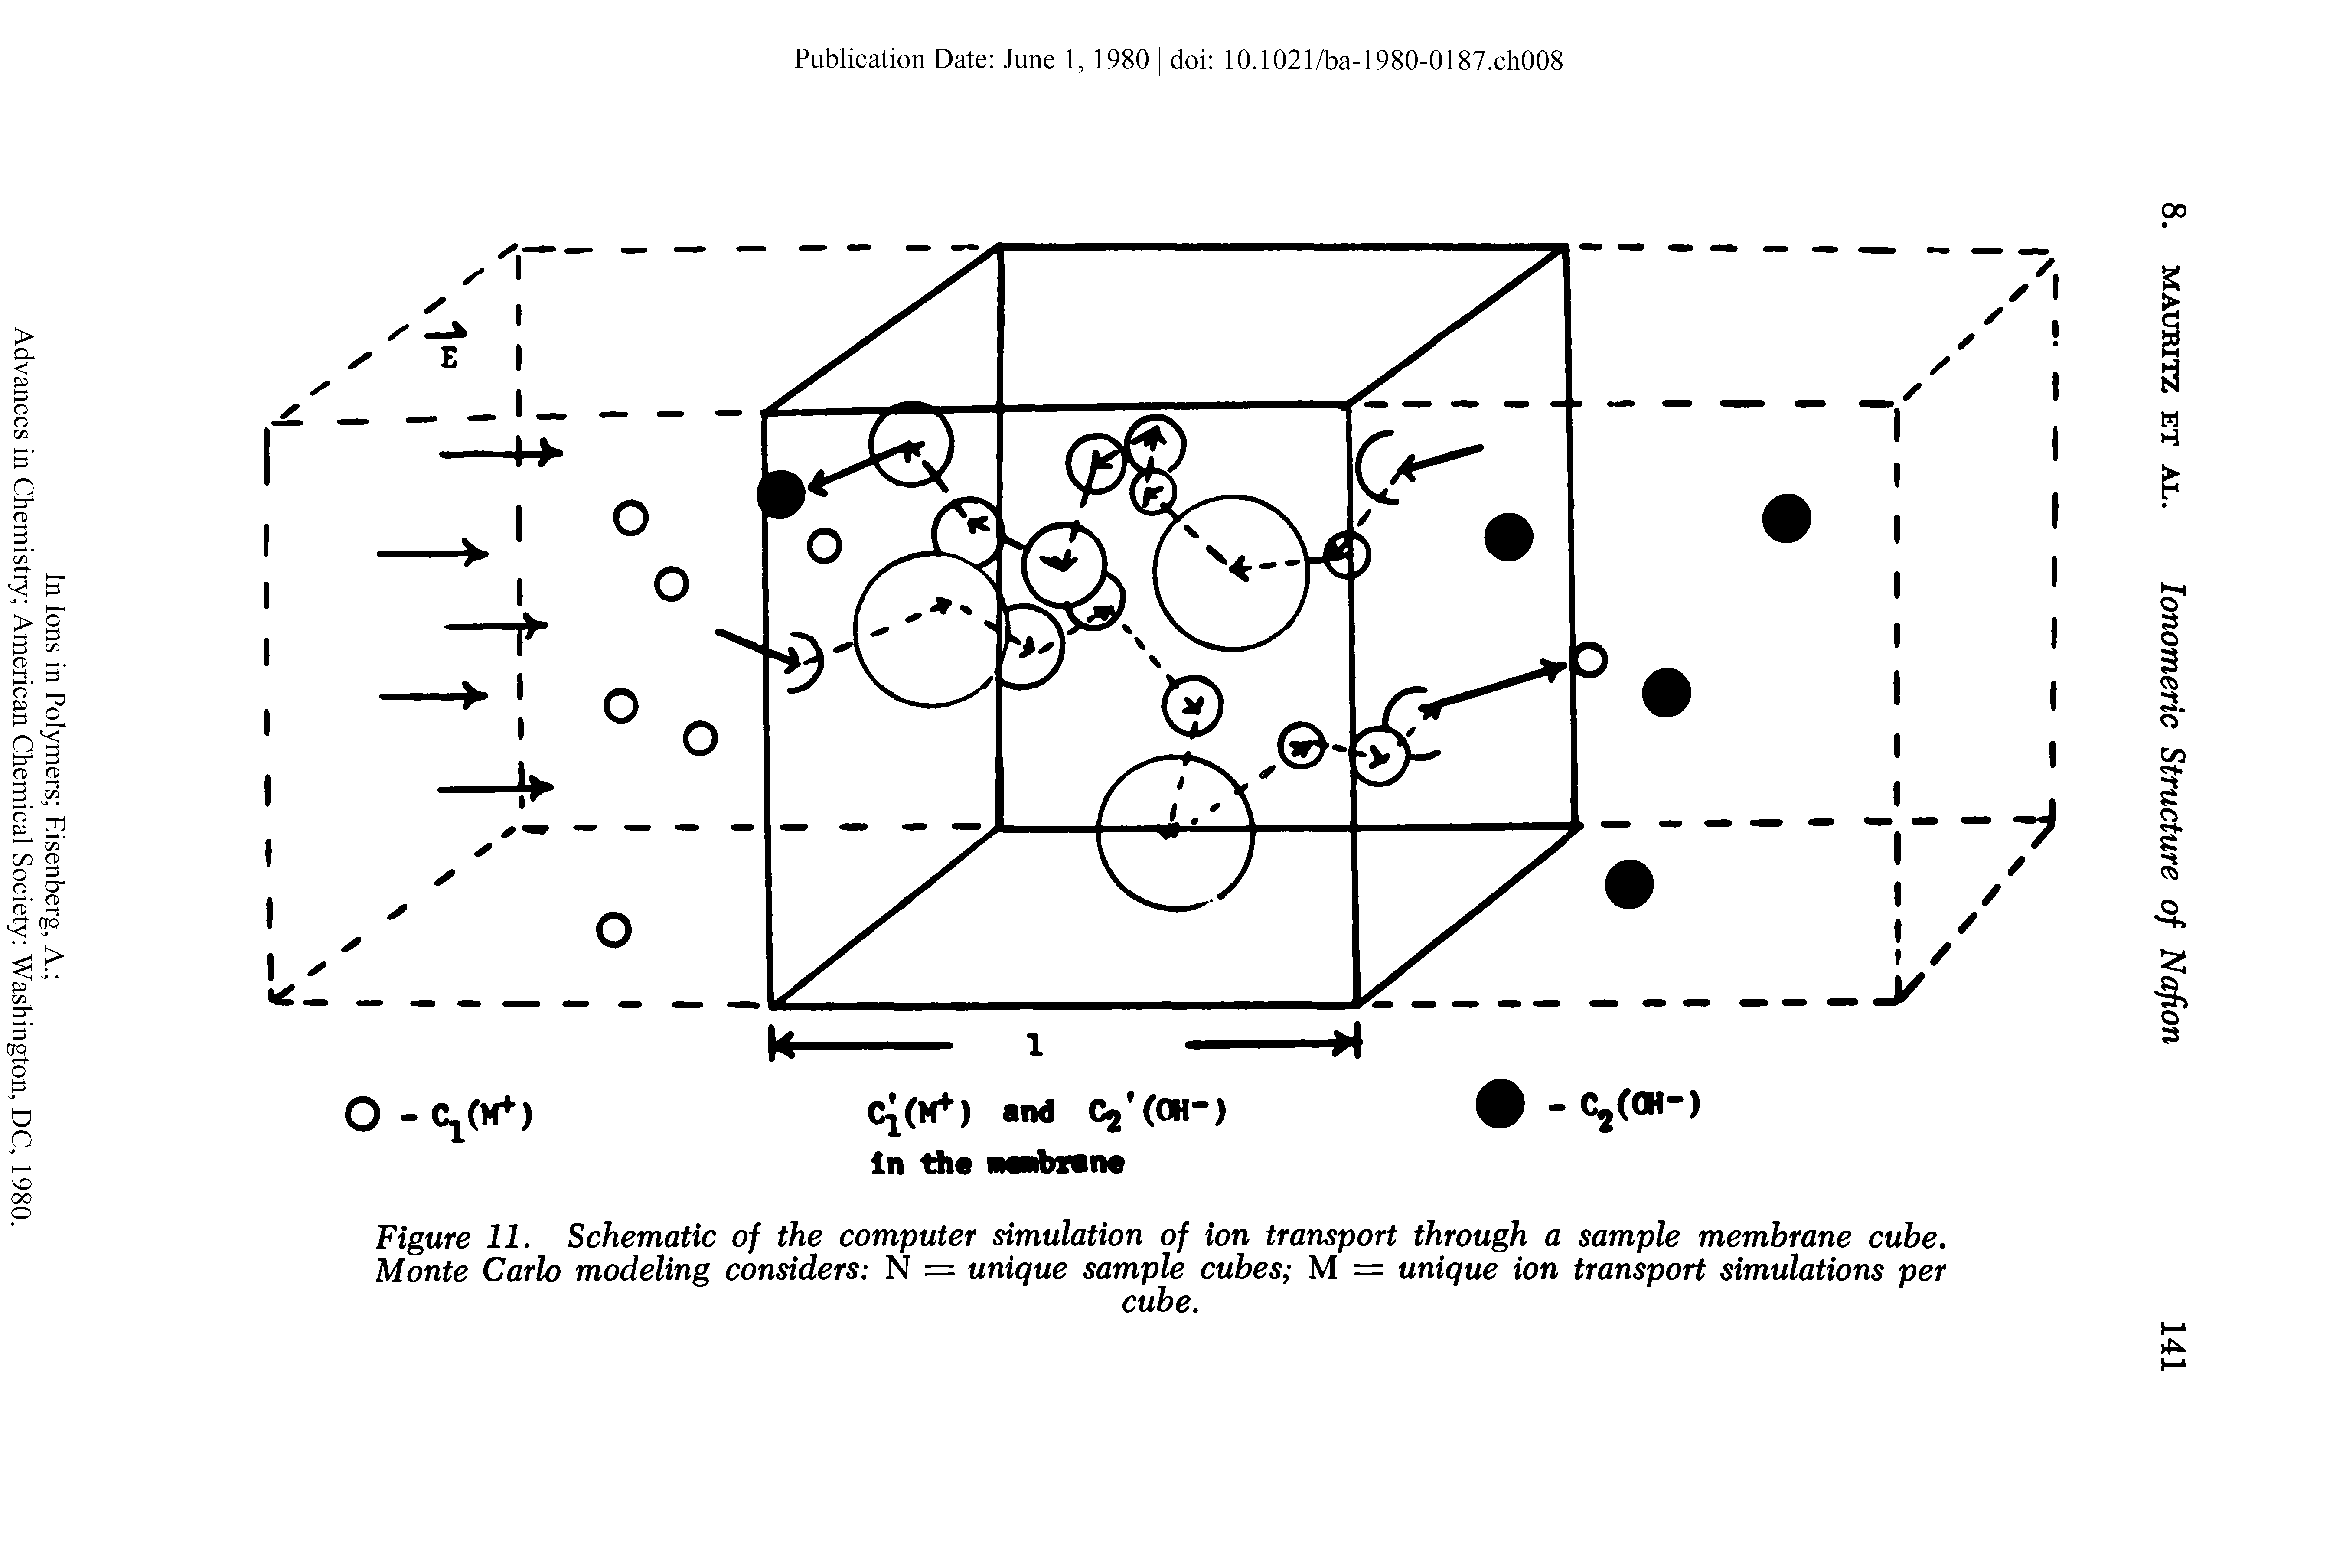 Figure 11. Schematic of the computer simulation of ion transport through a sample membrane cube. Monte Carlo modeling considers N = unique sample cubes M = unique ion transport simulations per...